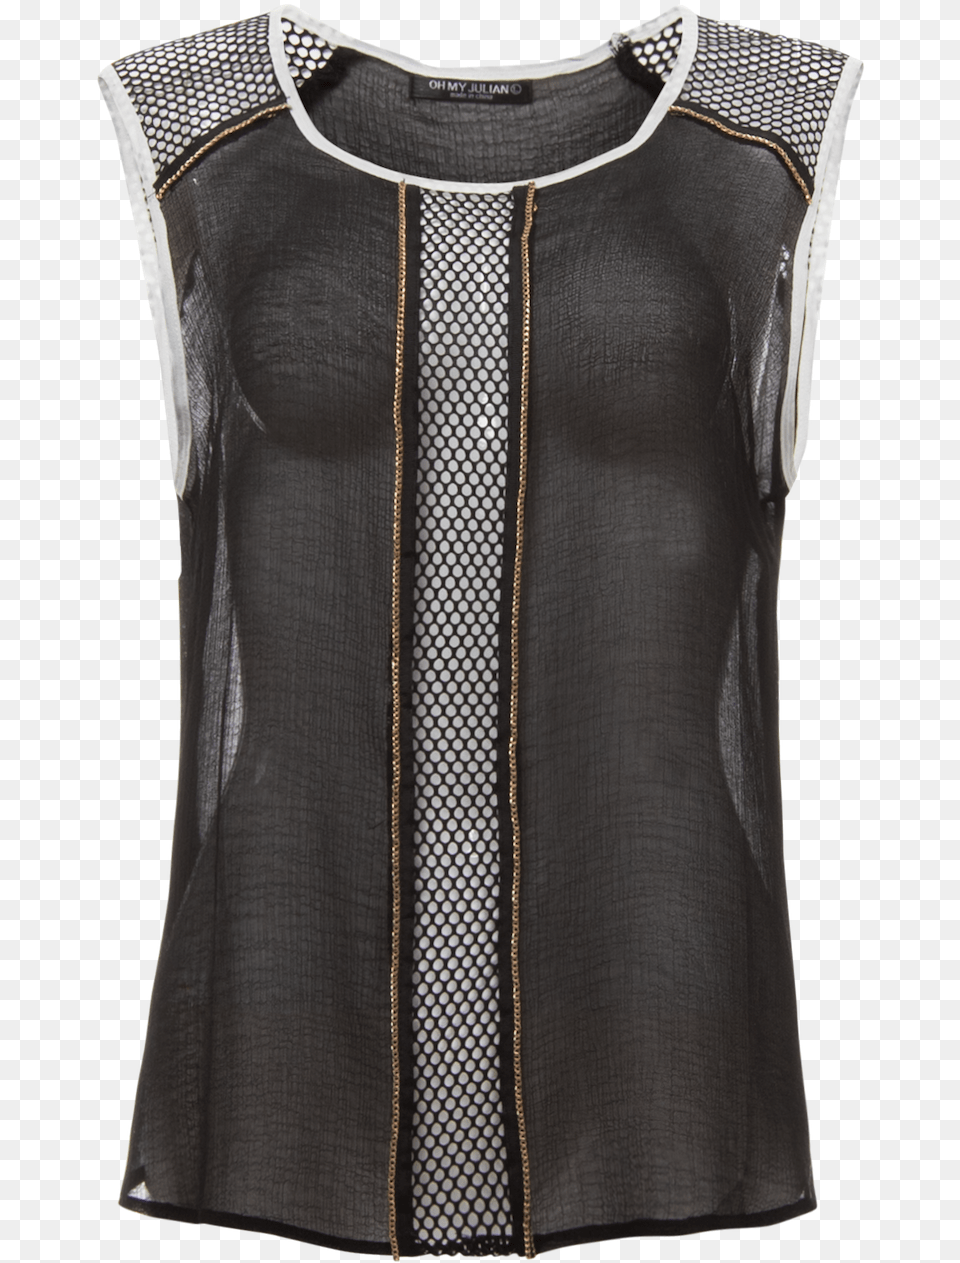 Transparent Mesh Texture Blouse, Armor, Clothing, Coat, Chain Mail Png